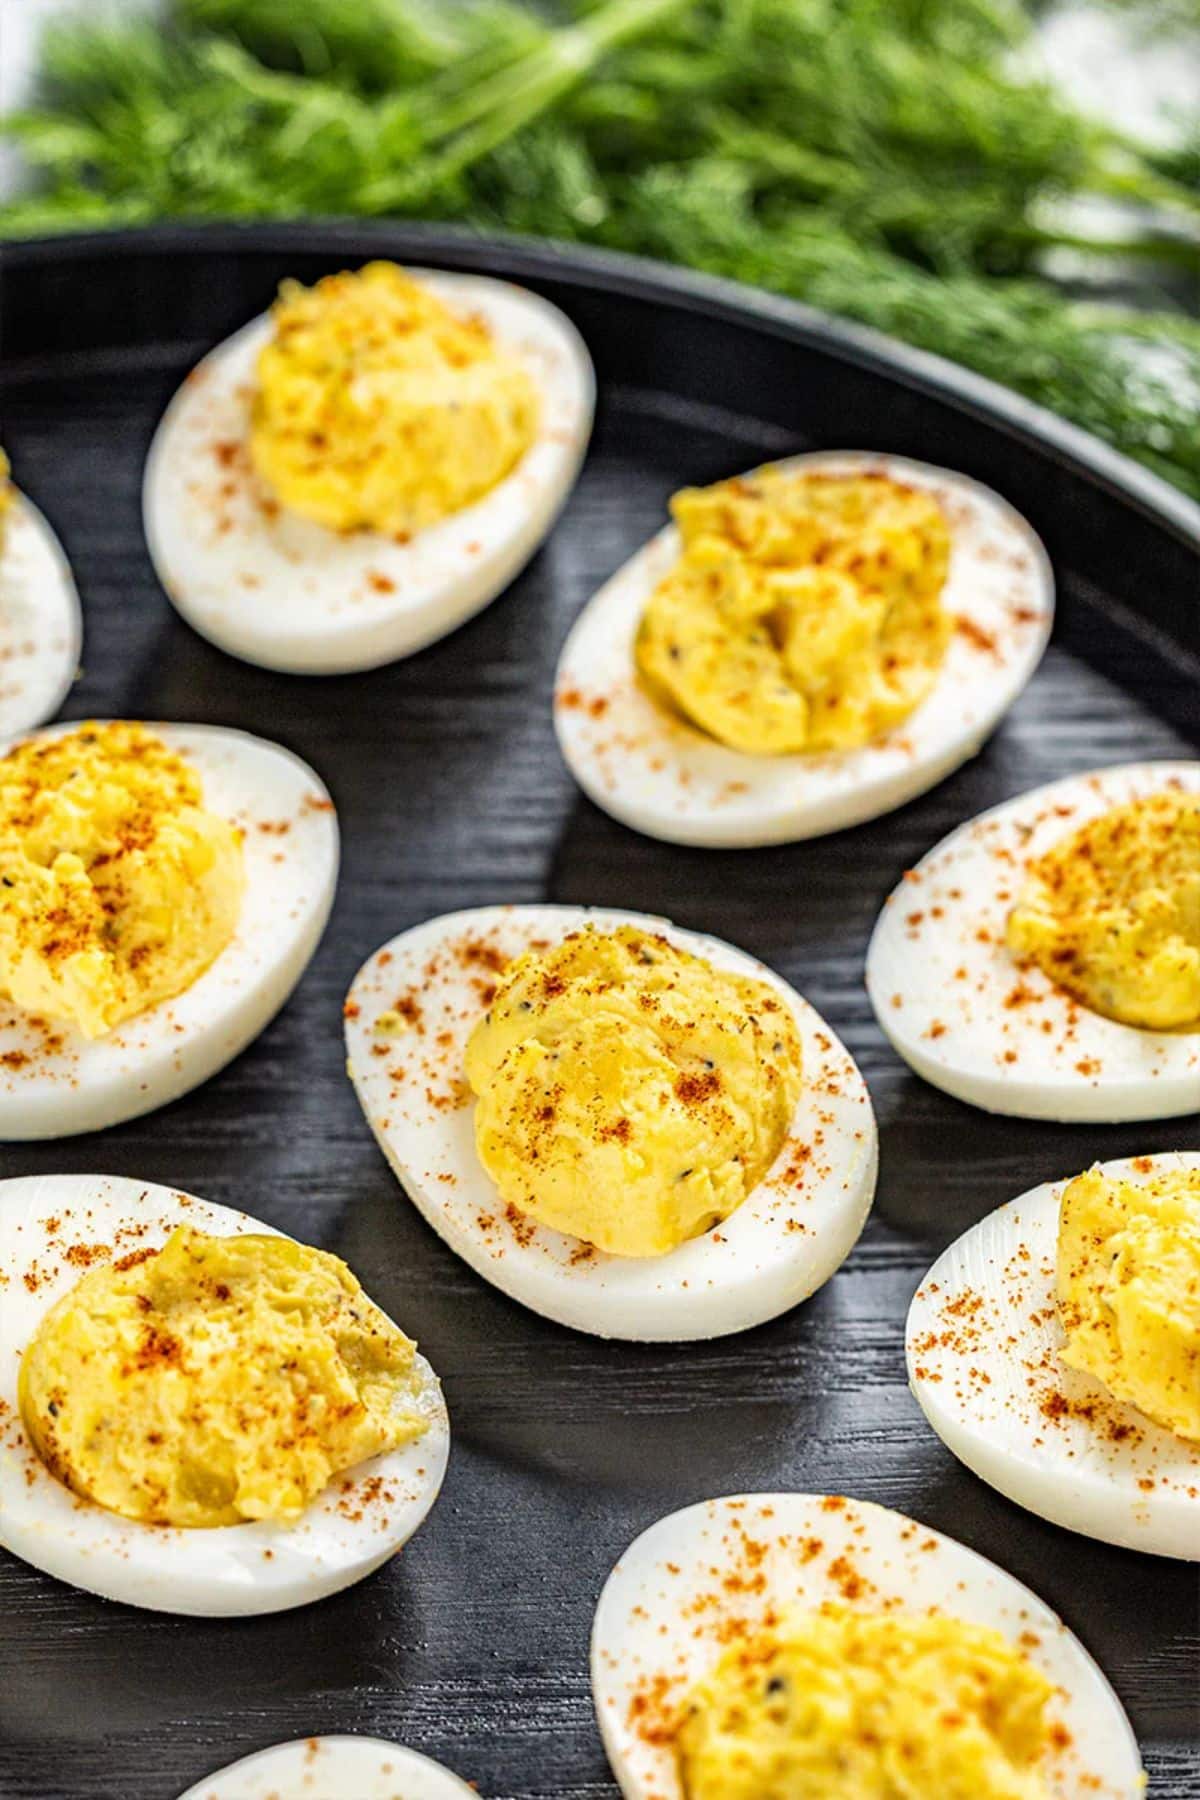 Delicious stuffed eggs on a black plate.